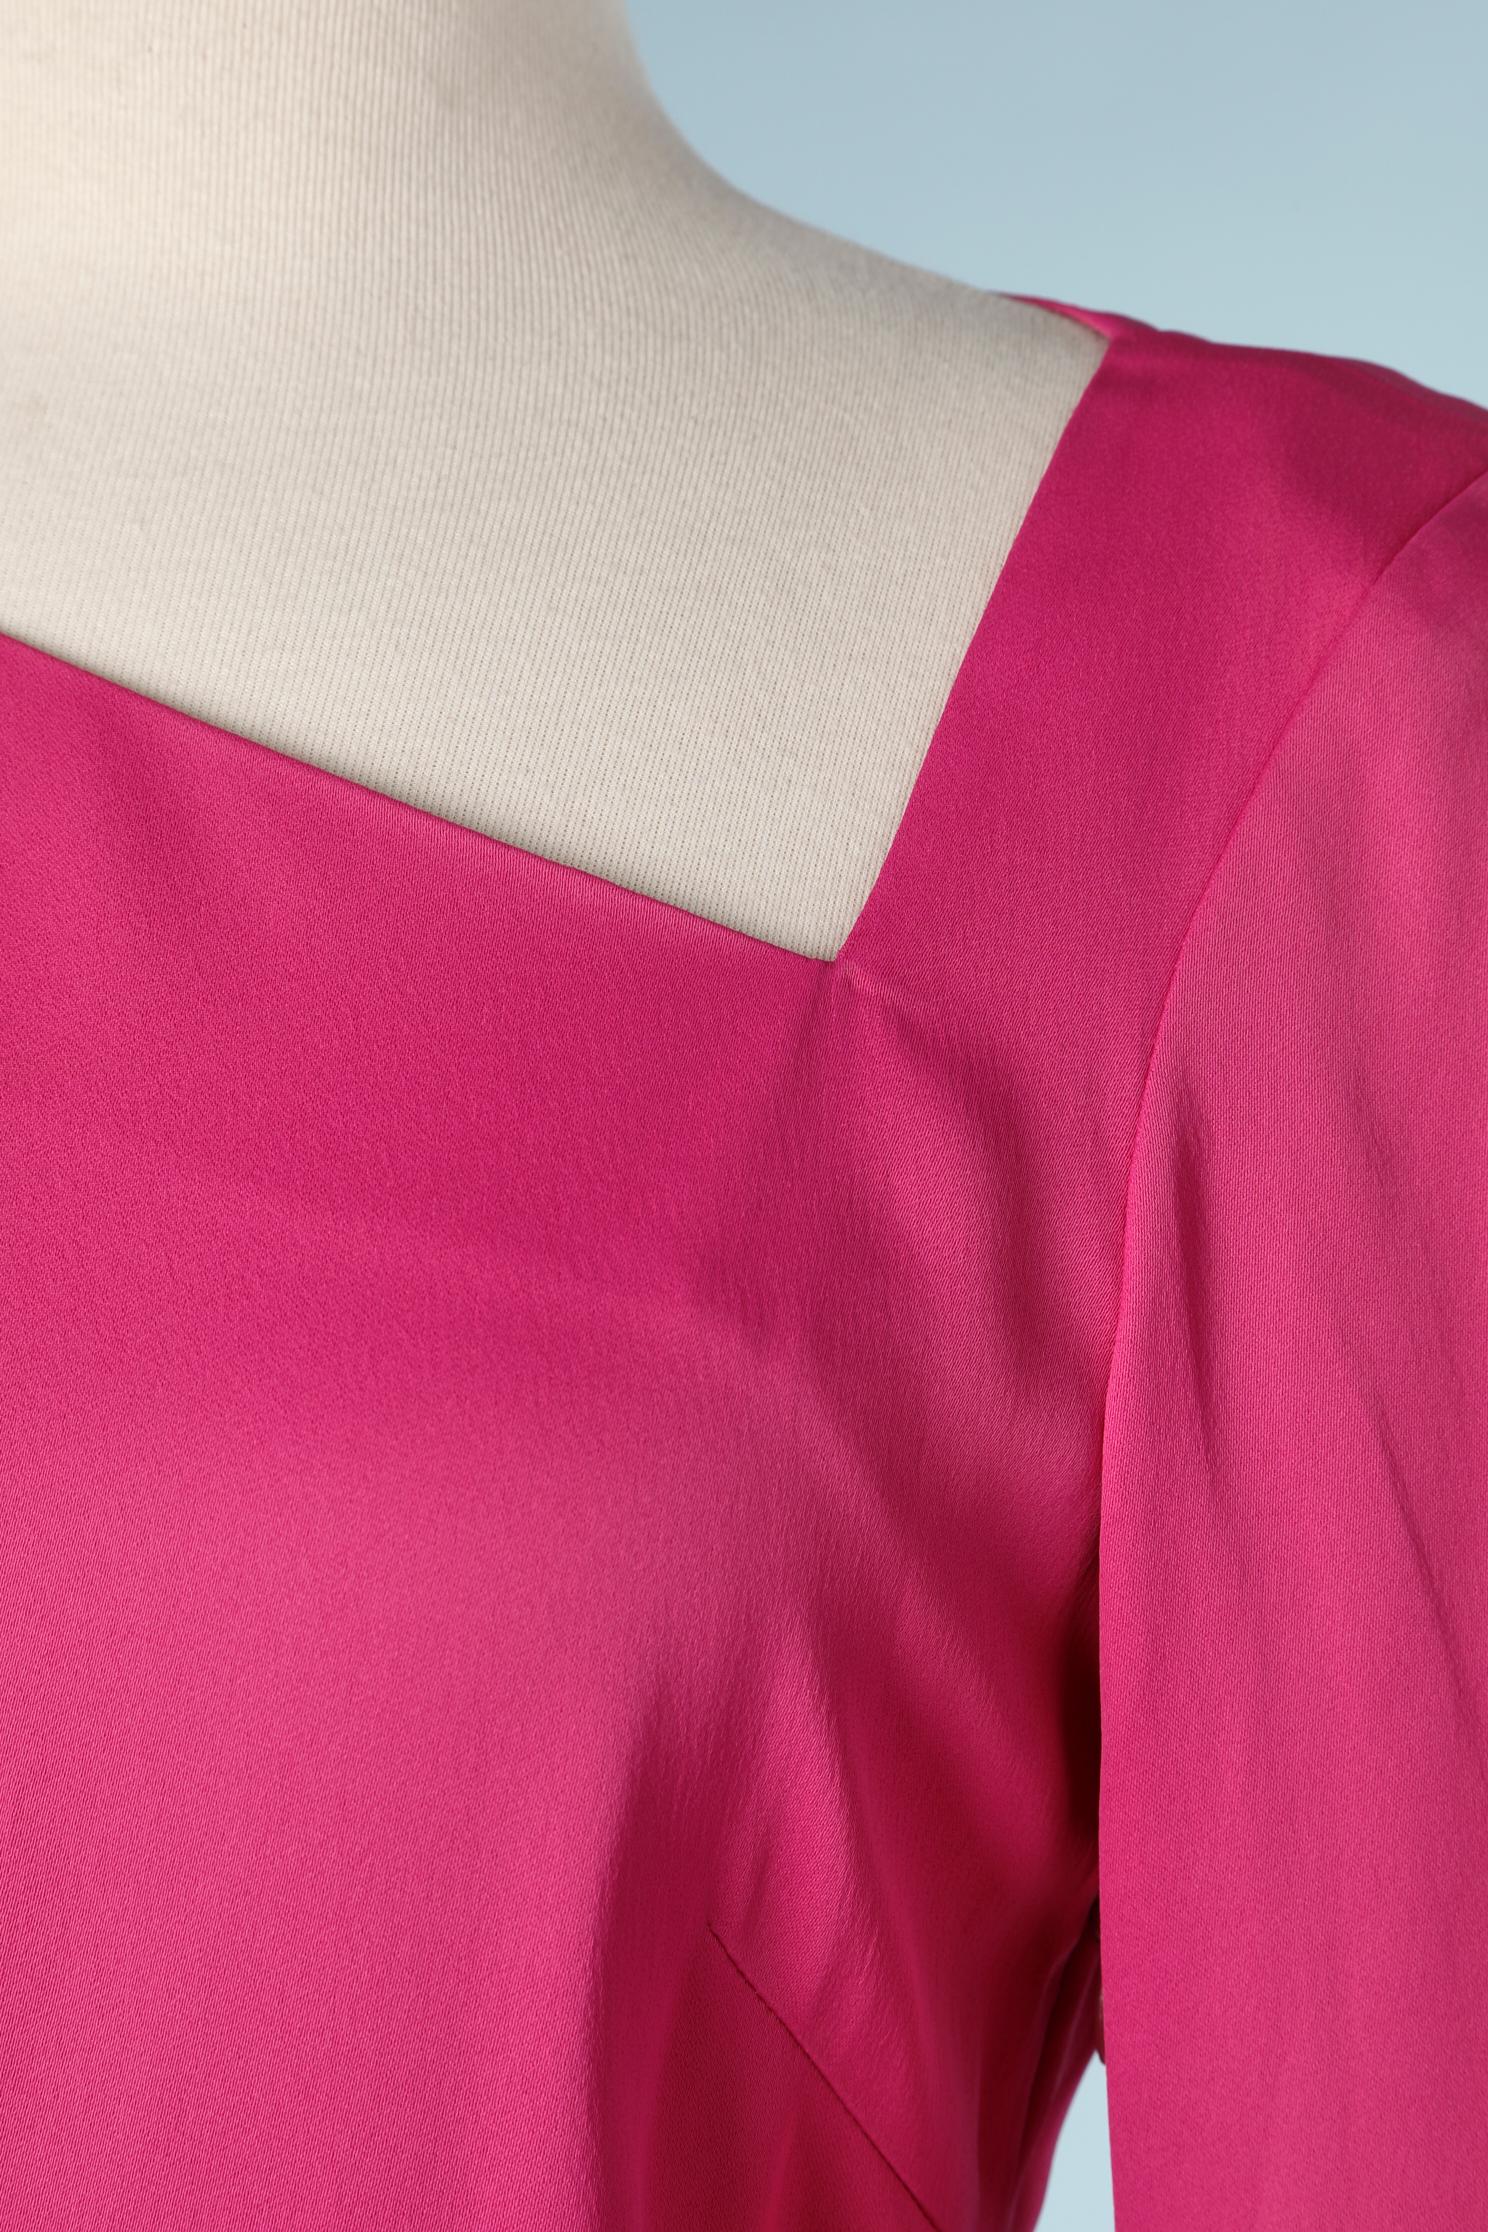 Pink asymmetrical collar dress with long sleeves zip at the end. Material : 85% acetate 15% rayon
Lining 100% rayon